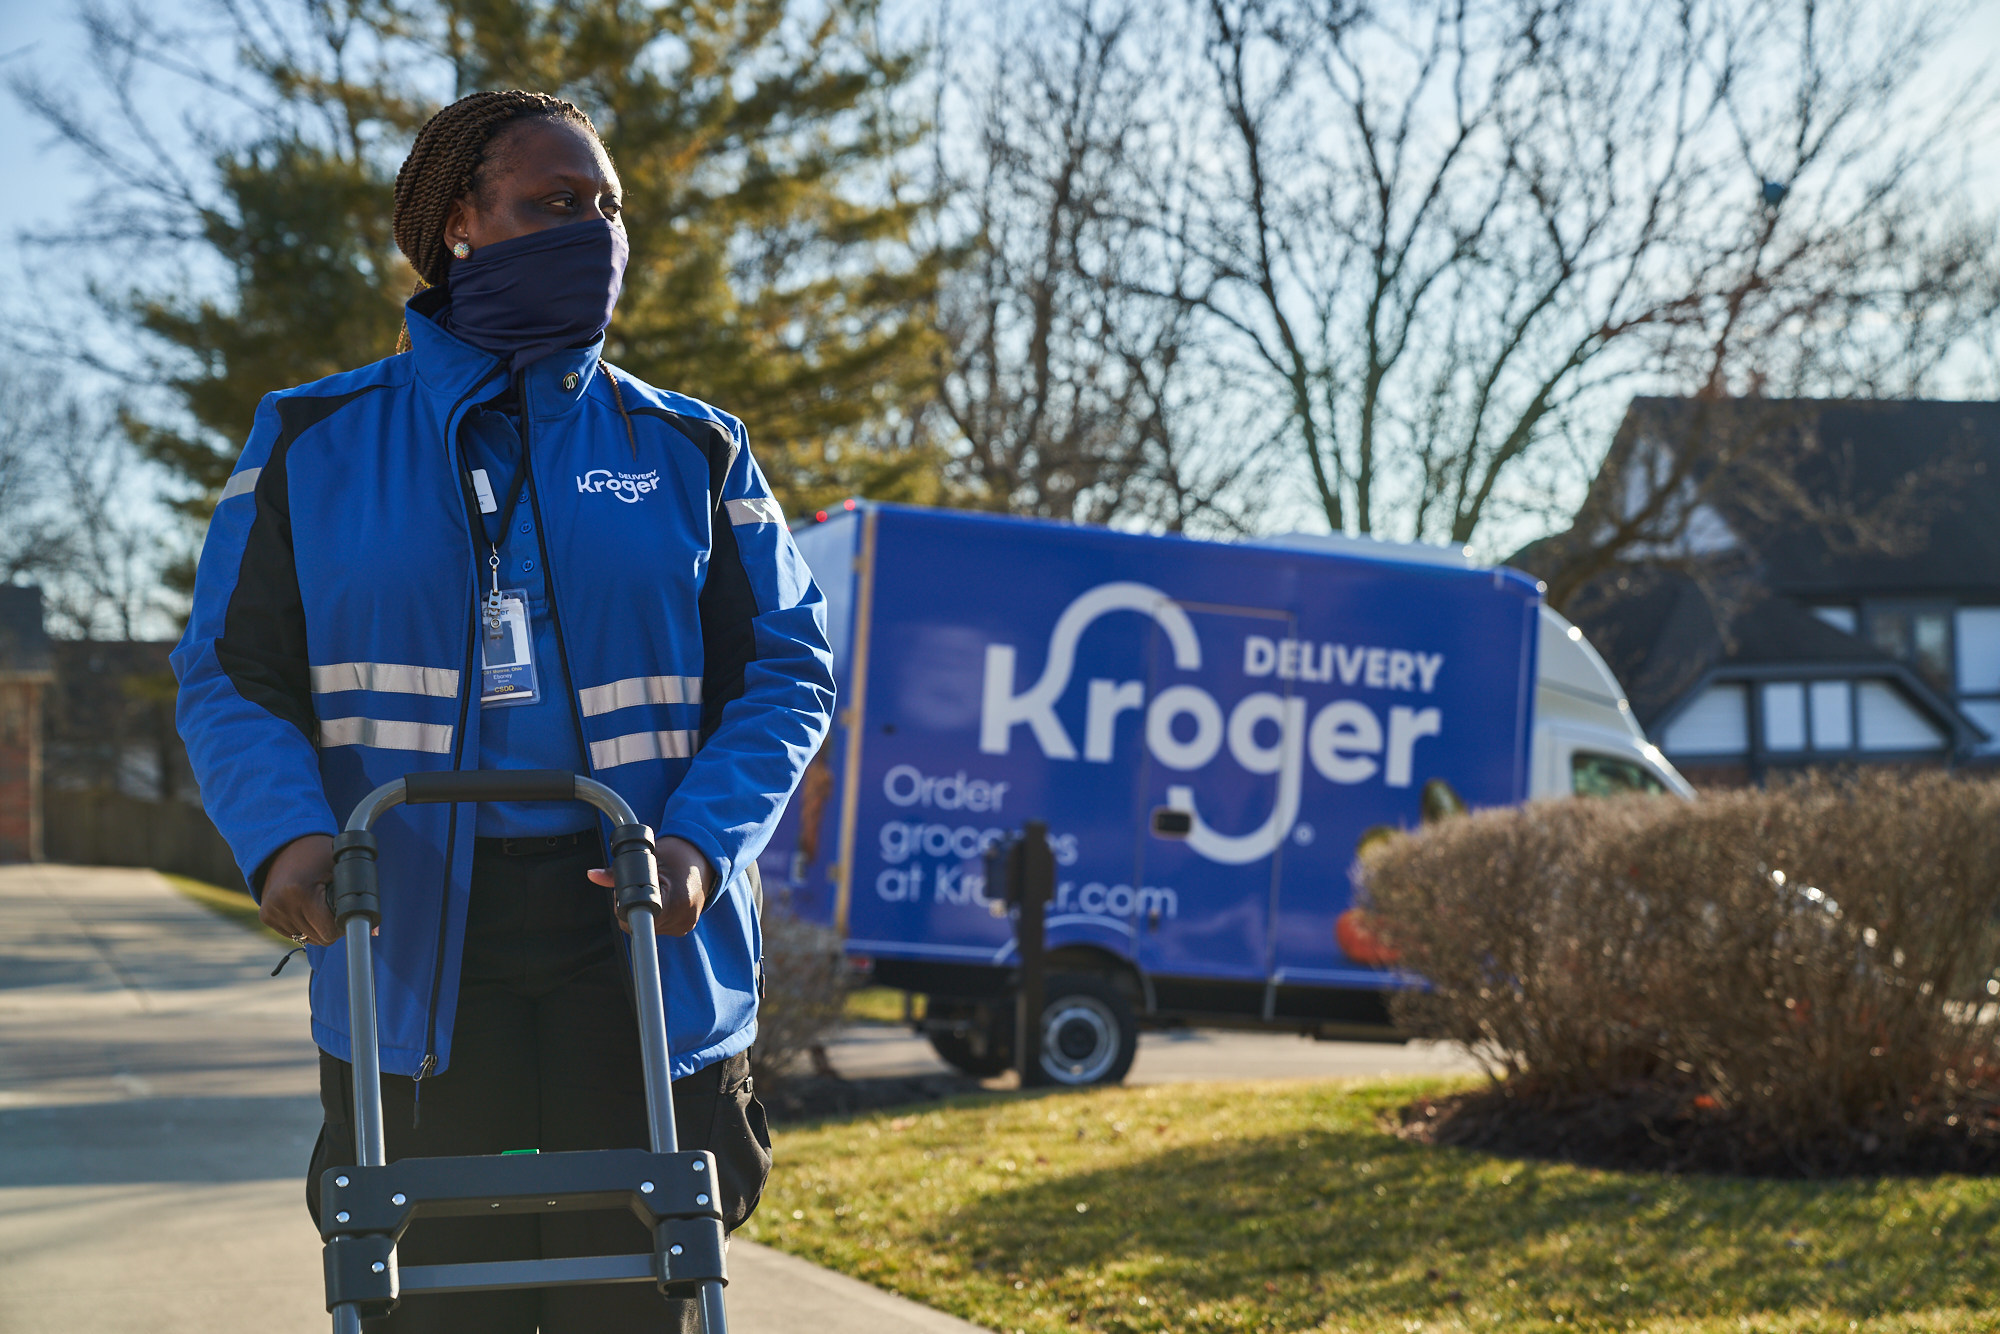 Kroger delivers groceries to customers in Tampa and Jacksonville and is preparing to begin service in Miami.